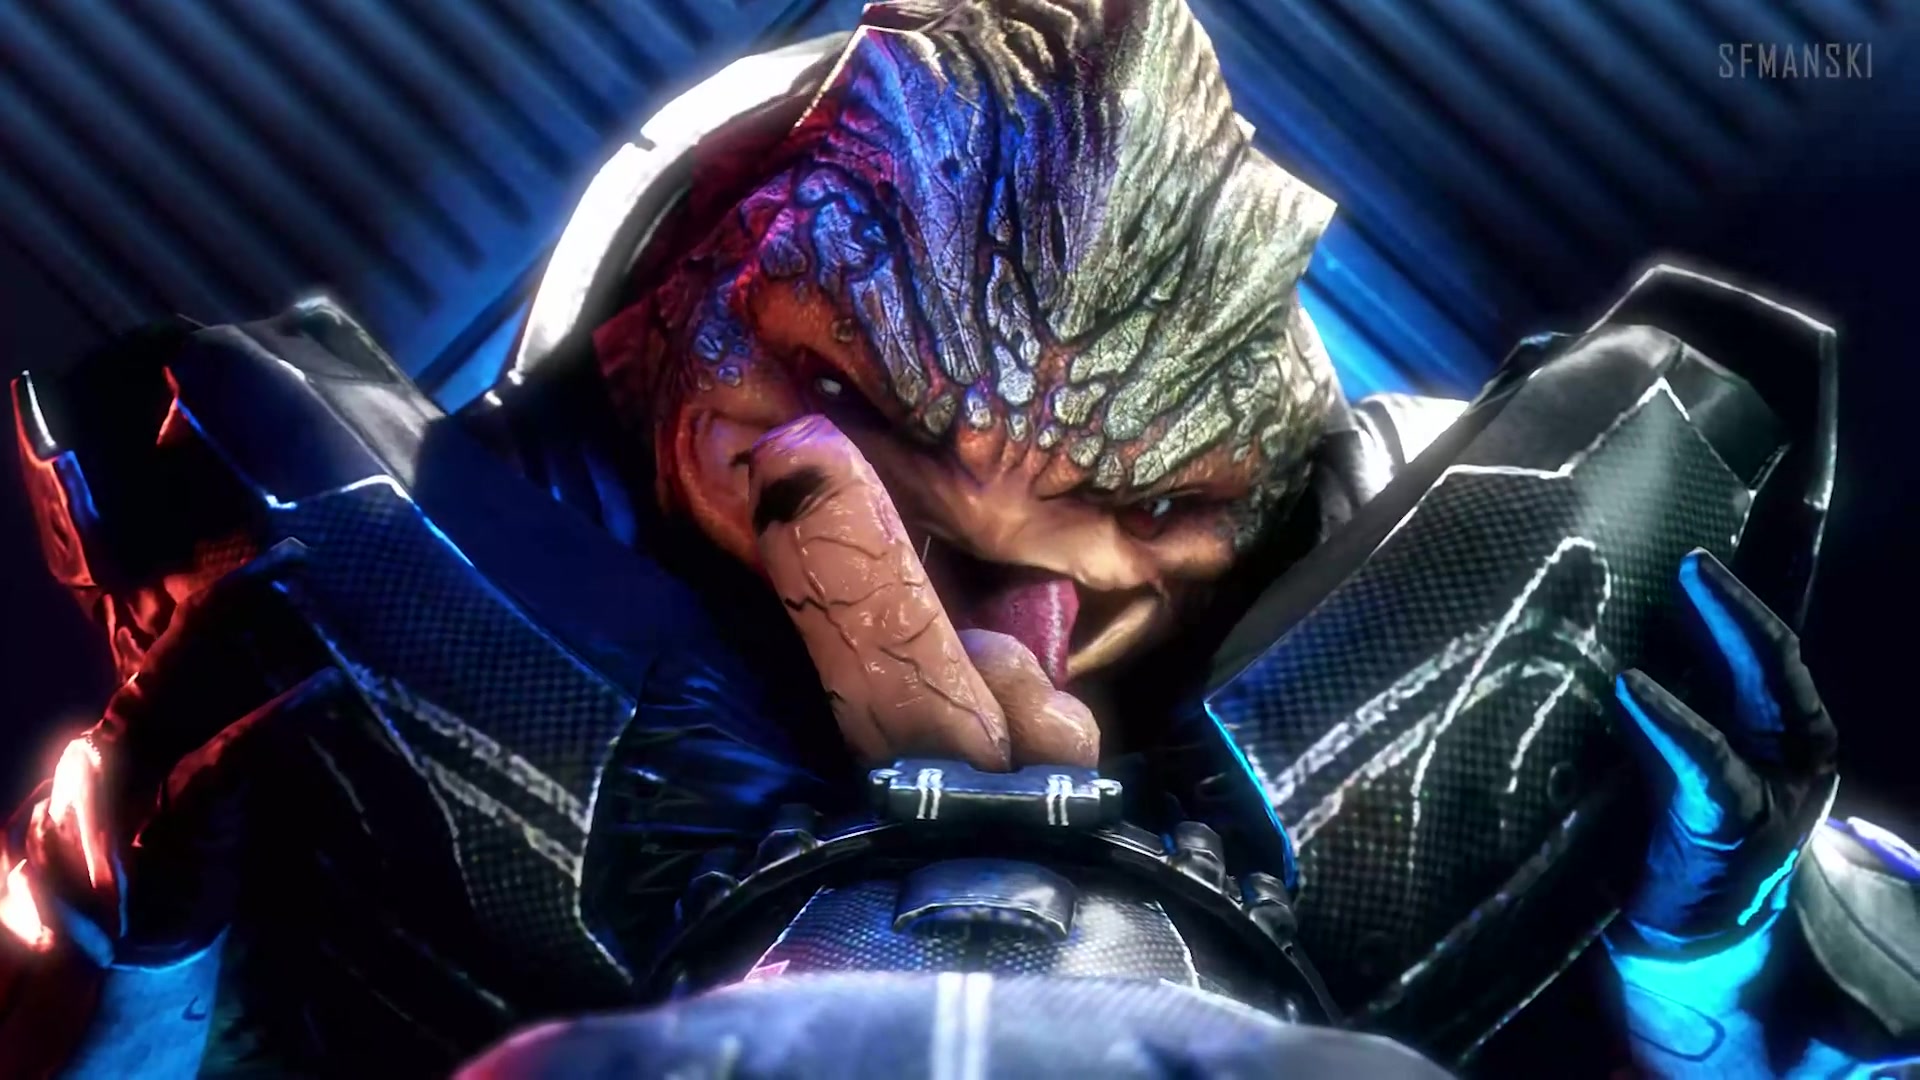 Mass Effect - Getting balls licked and sucked clean by Grunt